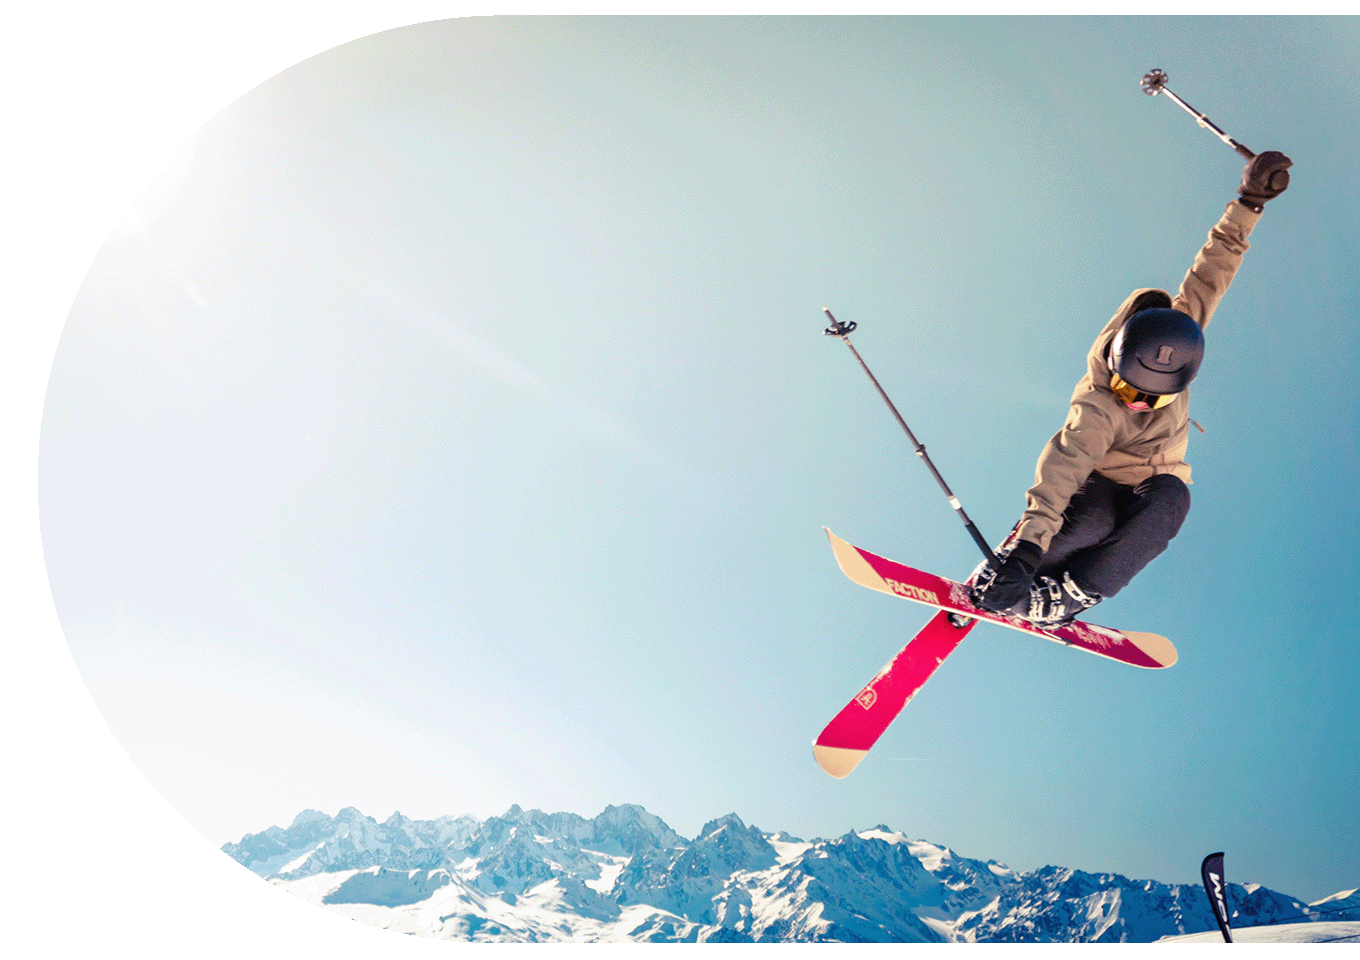 Skier pictured in mid-air in front of snow capped mountains and a clear blue sky